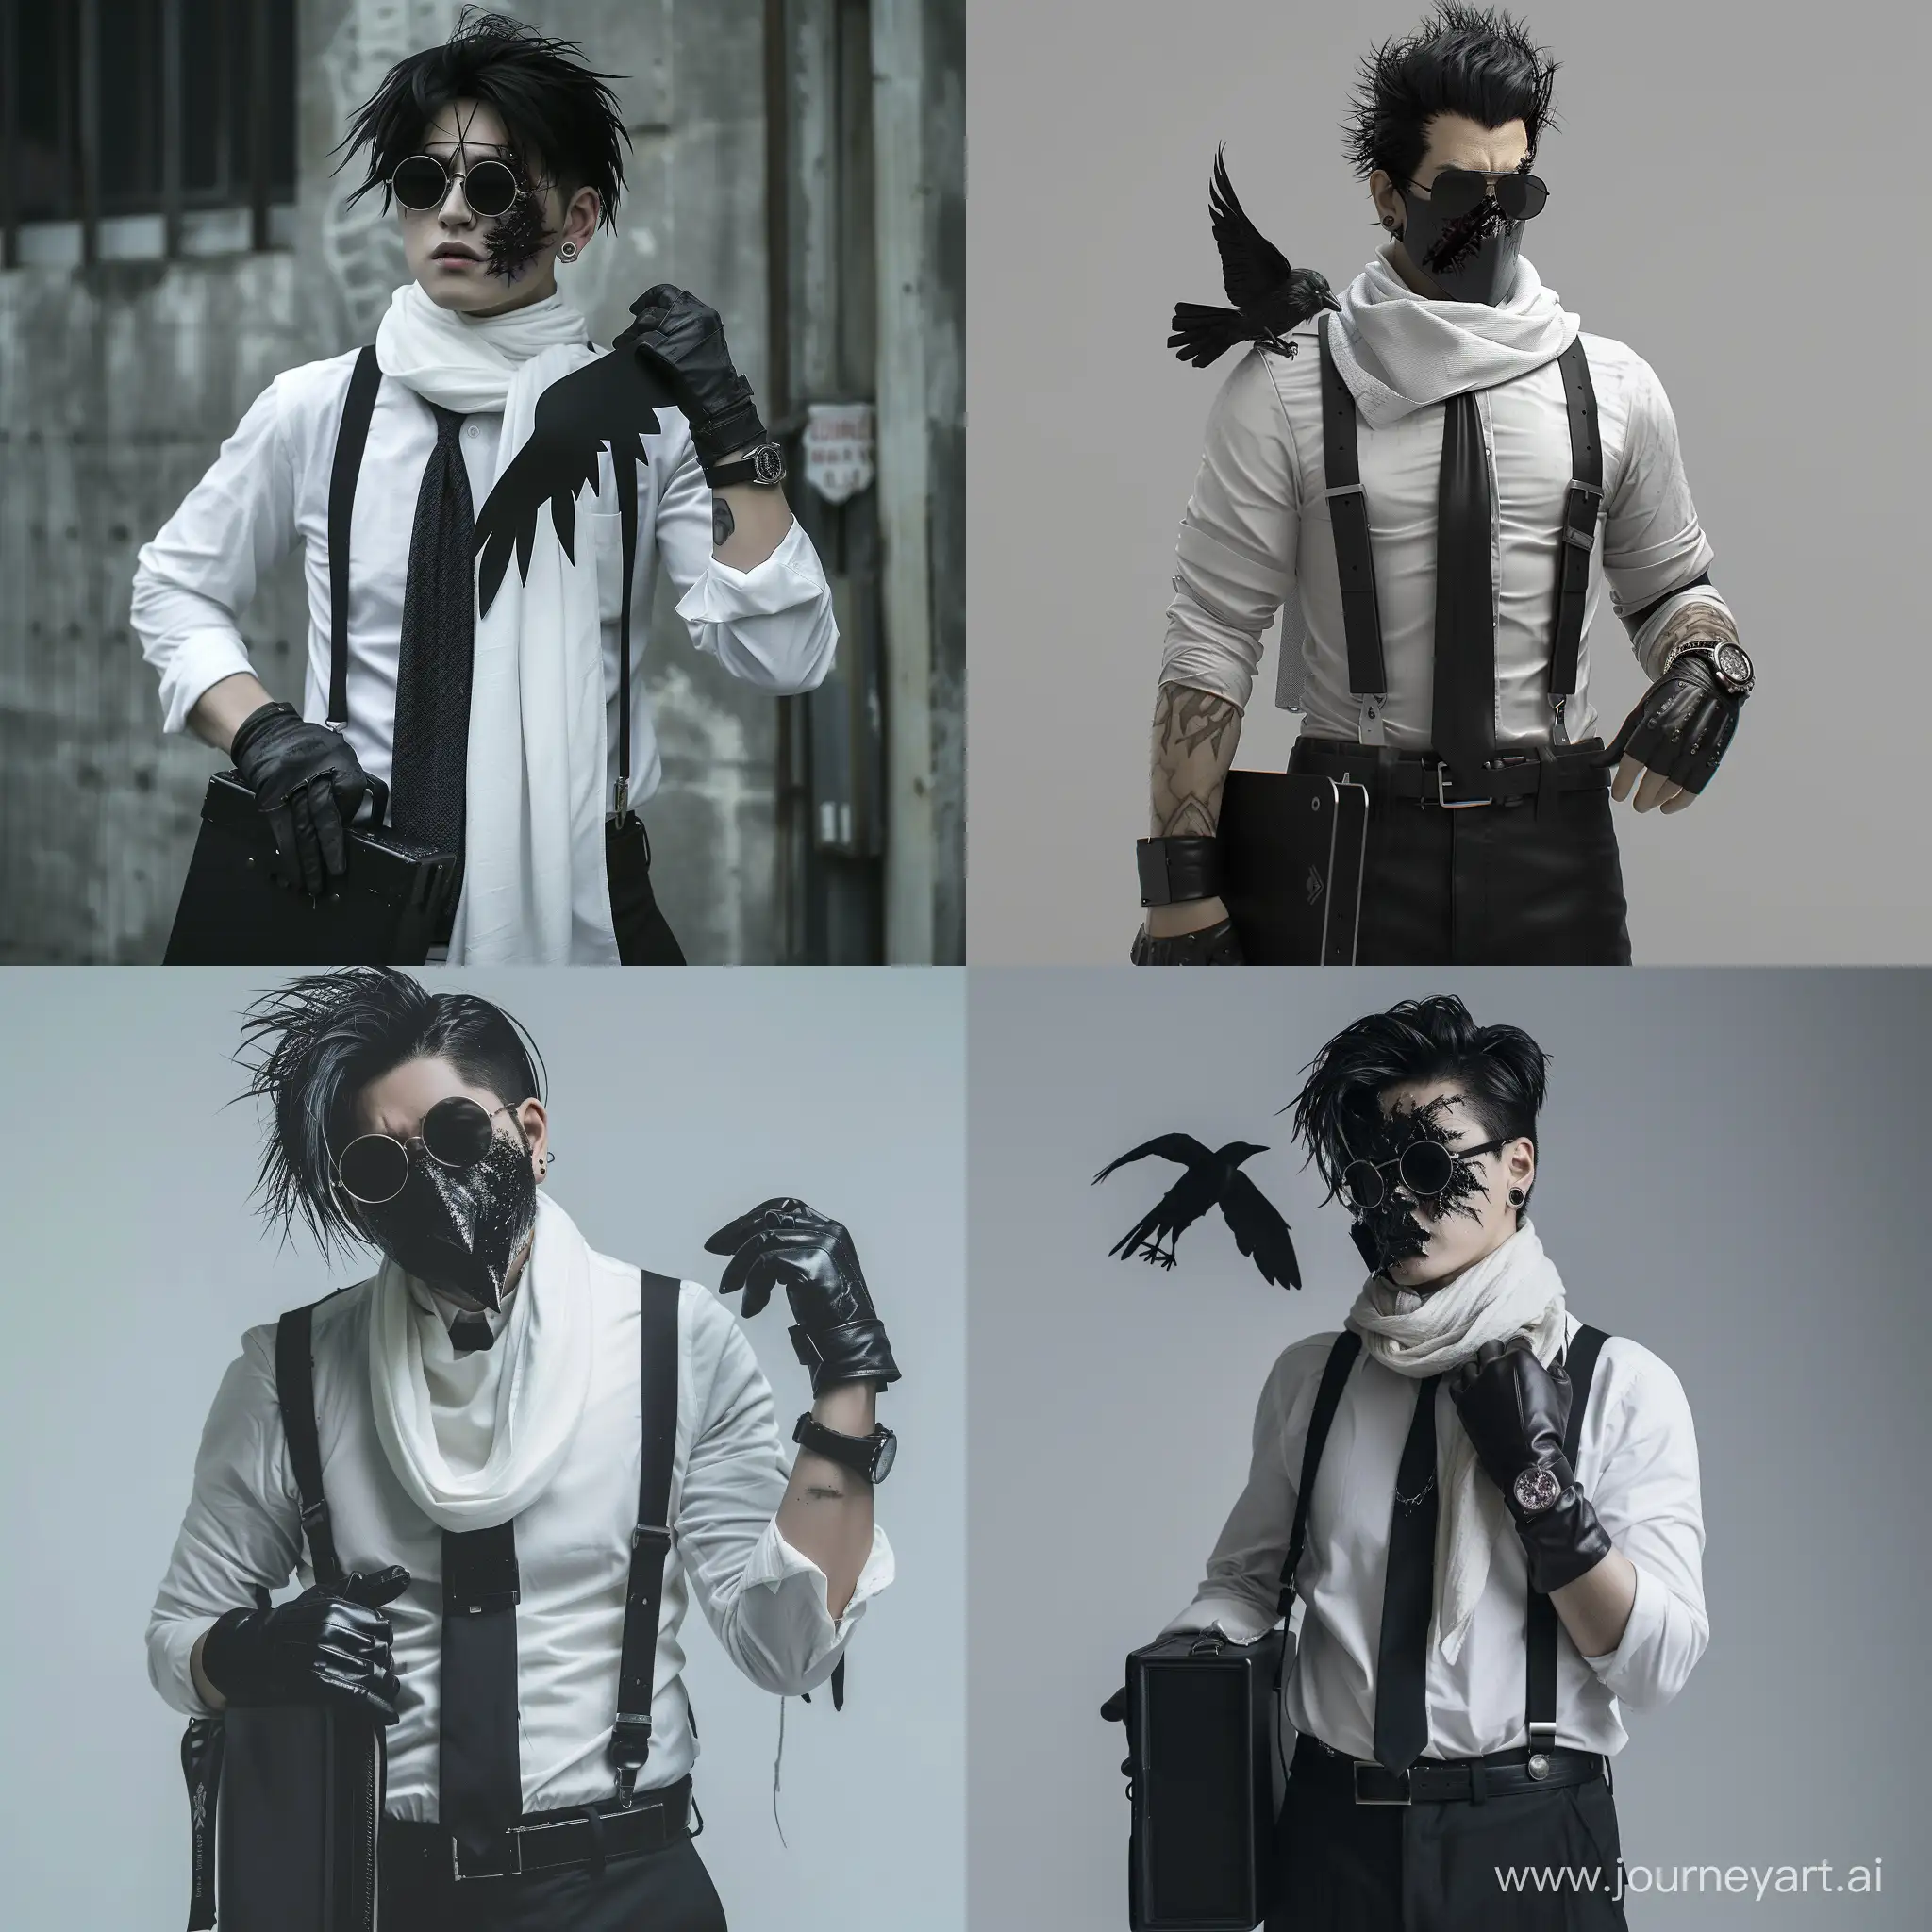 Mysterious-Man-in-90s-Style-with-Crow-Mask-and-Damaged-Face